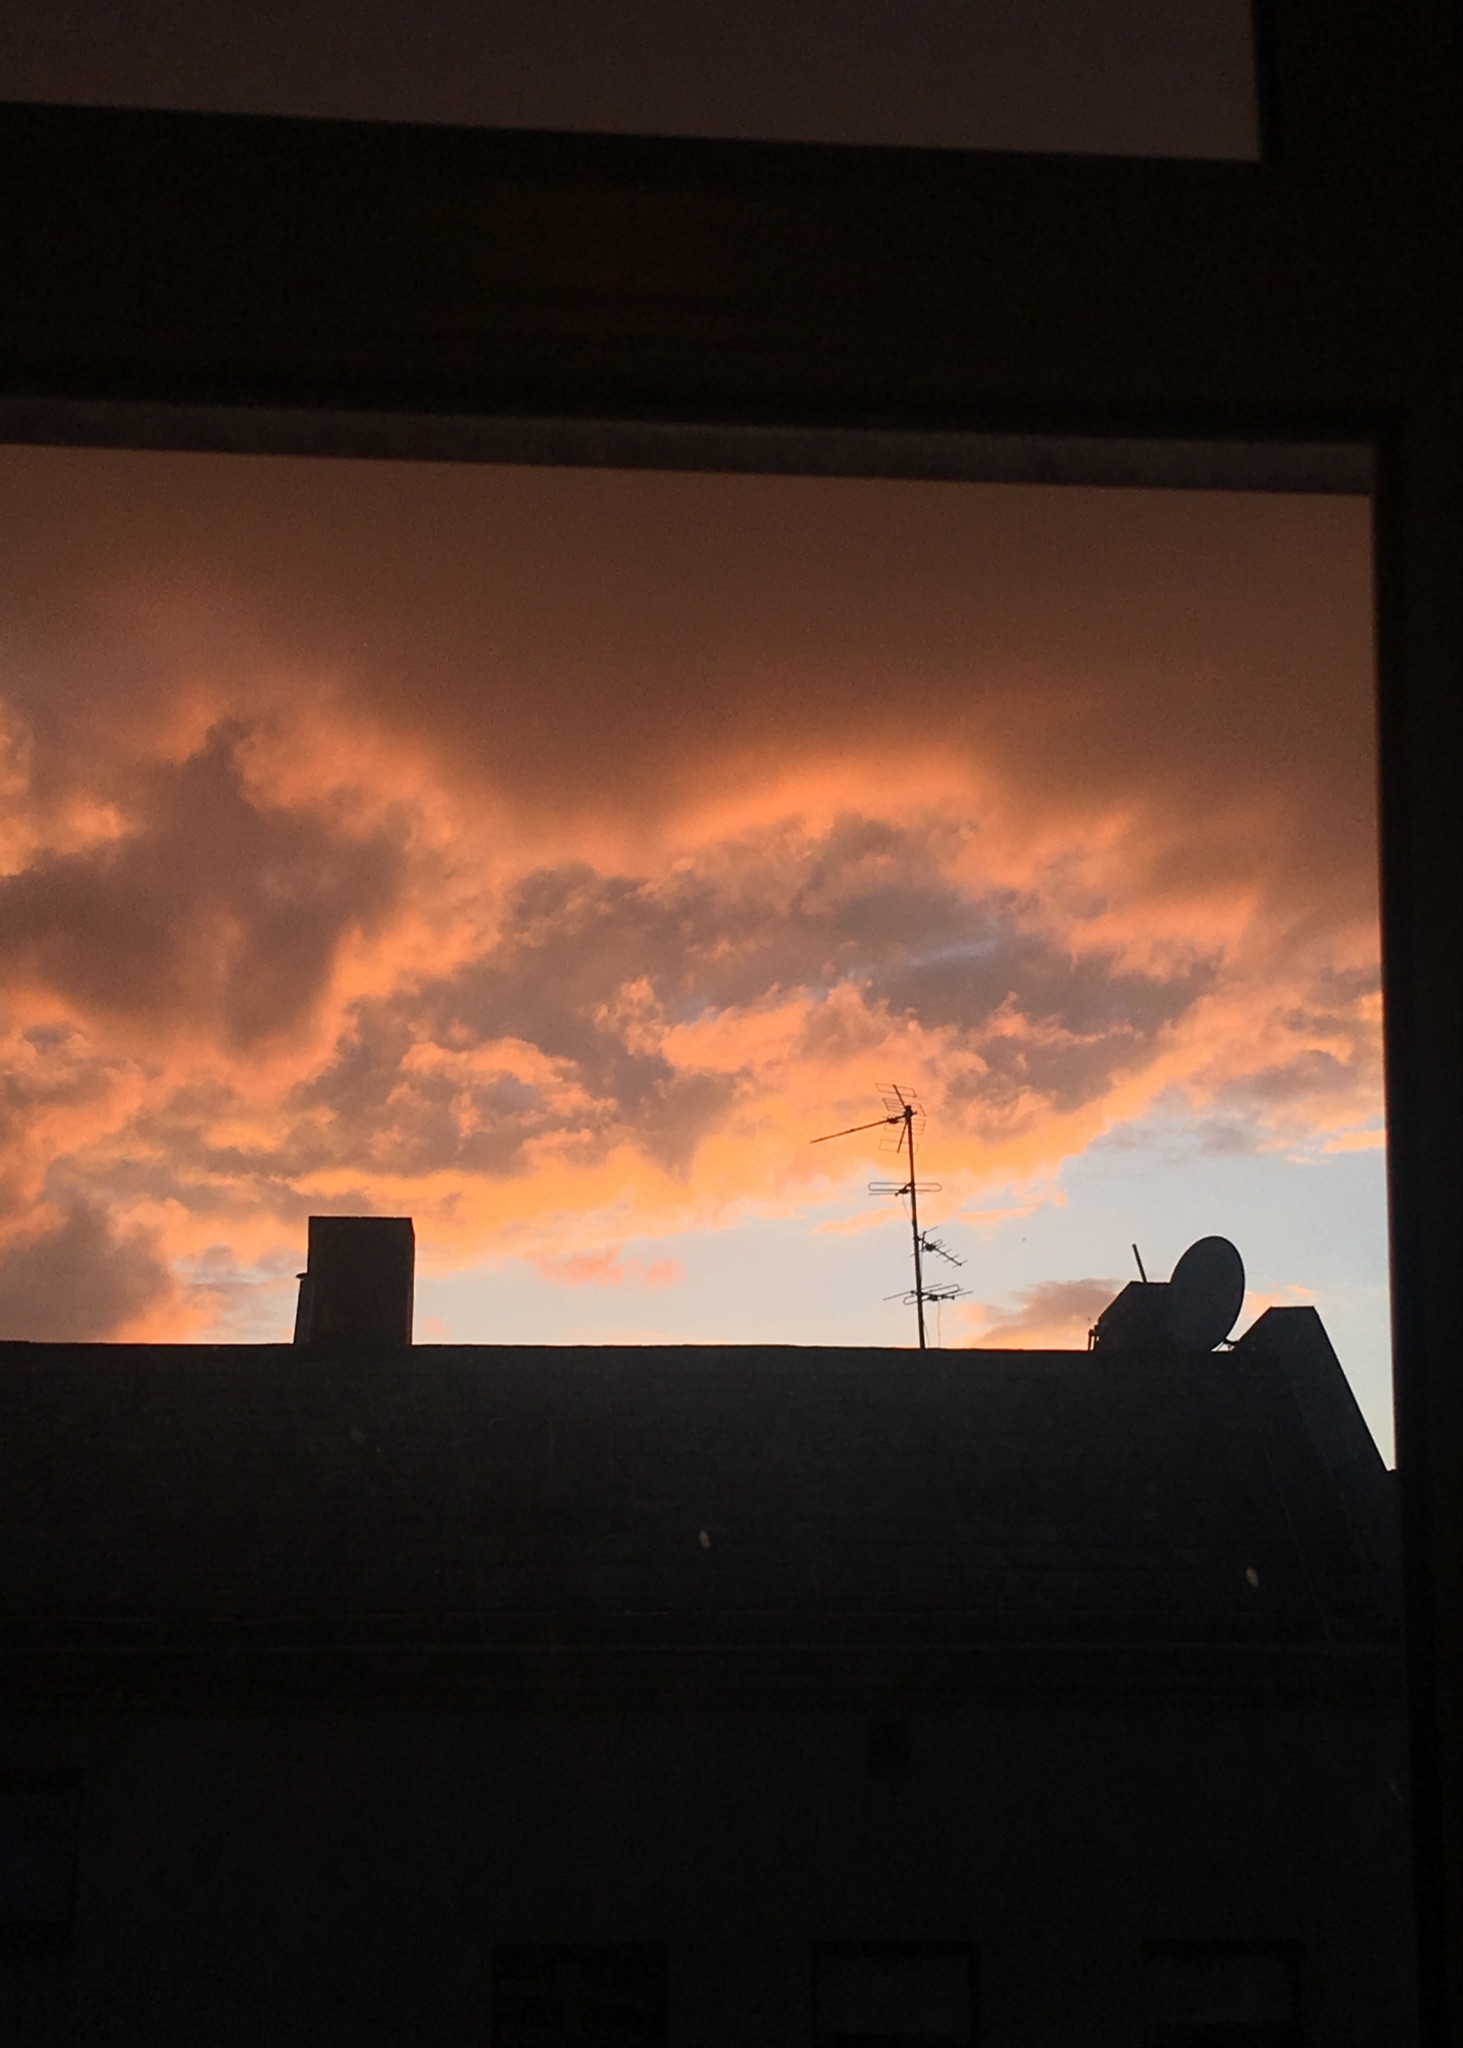 A sunset over a rooftop from a window.  The clouds are grey, orange, purple and pink with a sliver of blue sky.  A chimney, satellite dish, and antennae are silhouetted.  